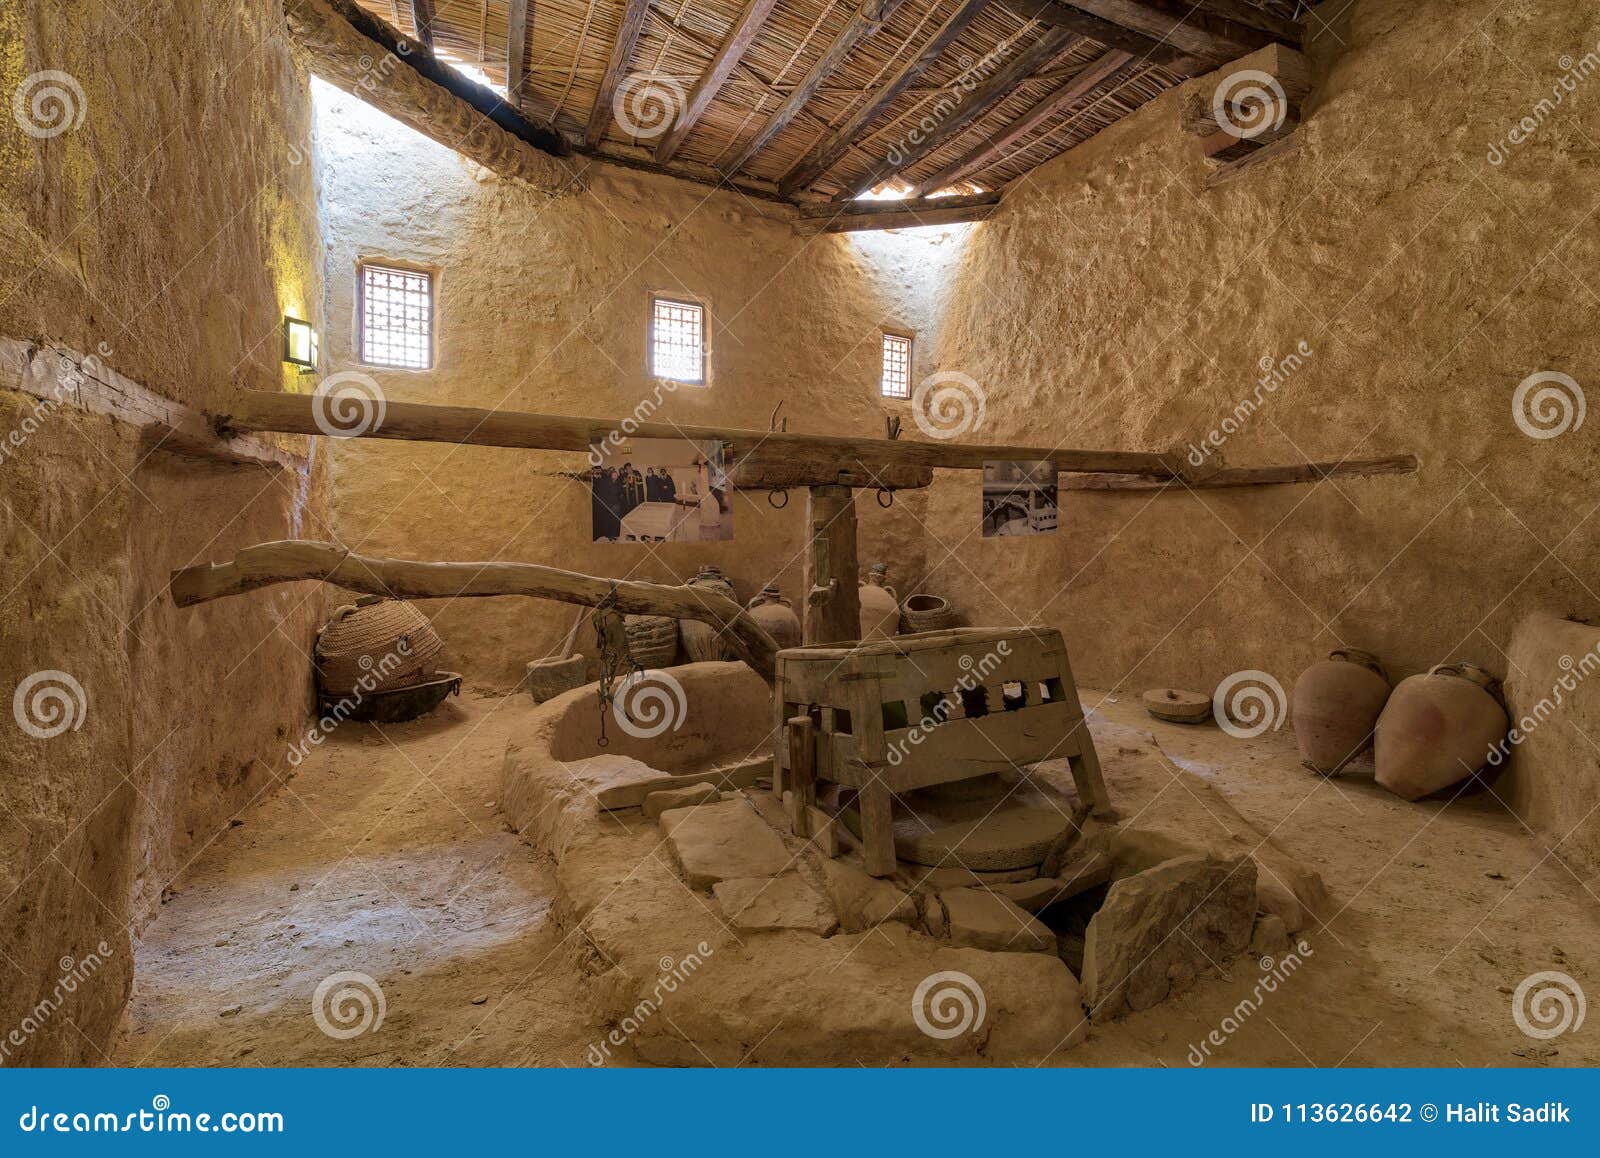 Ancient Rotary Flour Mill Used To Be Rotated by Animal Power at the  Monastery of Saint Paul the Anchorite, Egypt Editorial Photography - Image  of rotated, grinder: 113626642